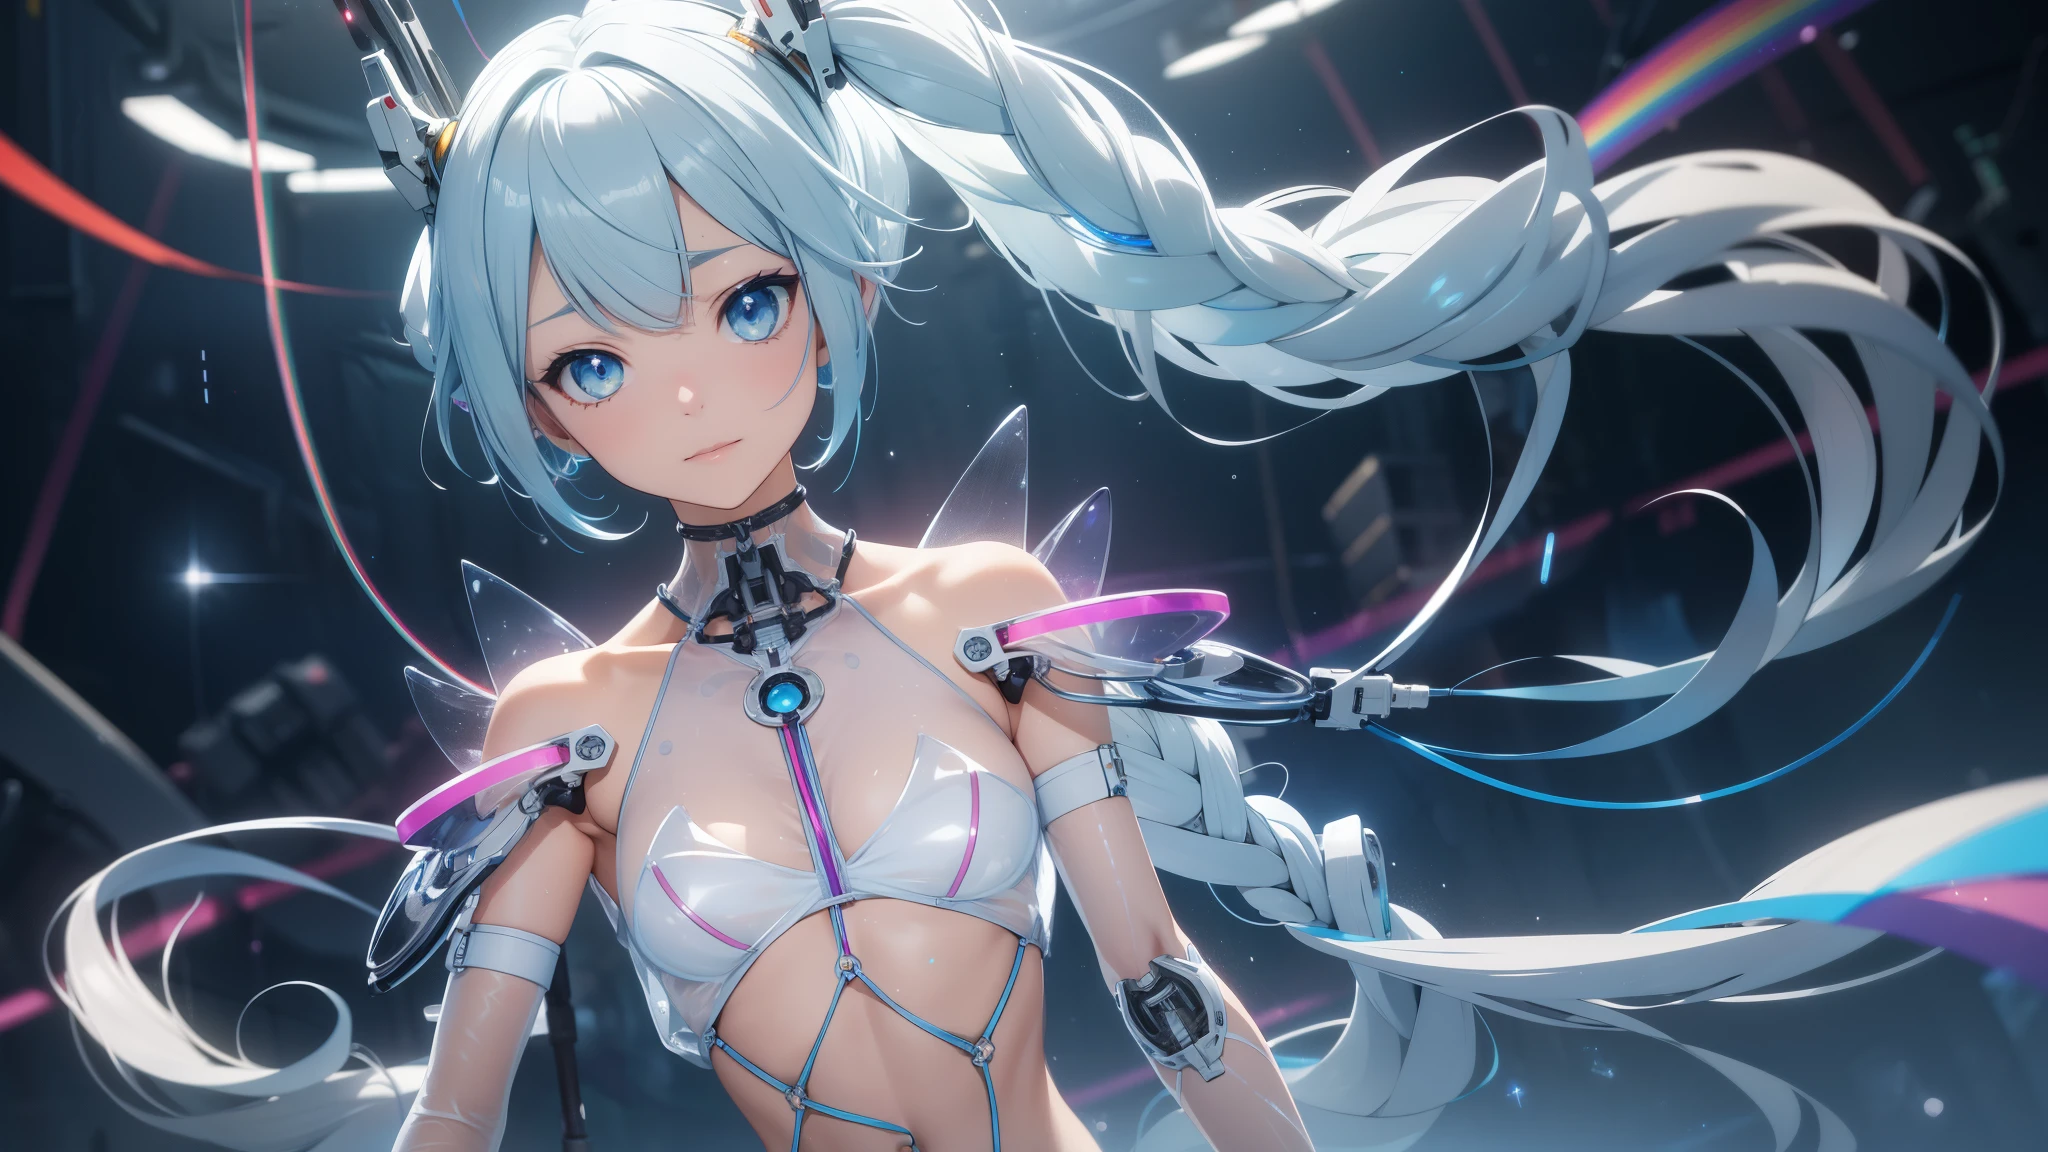 (quality)), ((masterpiece)), Recommended results、Puffy nipples、(see through:1.5)、straighten your back、abdominal muscles、huge bust、angle to floor:1.2、low camera angle、Hair loss on crotch，hatsune miku，super detailed)), (Very detailed CG illustrations), ((extremely delicate and beautiful)),(1 white transparent mechanical girl)),alone,whole body,(Machine made joints:1.2),((mechanical limbs)),(Flashing blood vessel points connected to tubes),(Mechanical vertebrae attached to the back，with flowing glitter.),((Flowing rainbow fixed around neck)),perfect round face,(wires and cables attaching to neck:1.2),(Rainbow wires and cables on the head:1.2)(Character focus),,Very detailed,colorful,most detailed，white ceramic skin，blue short hair